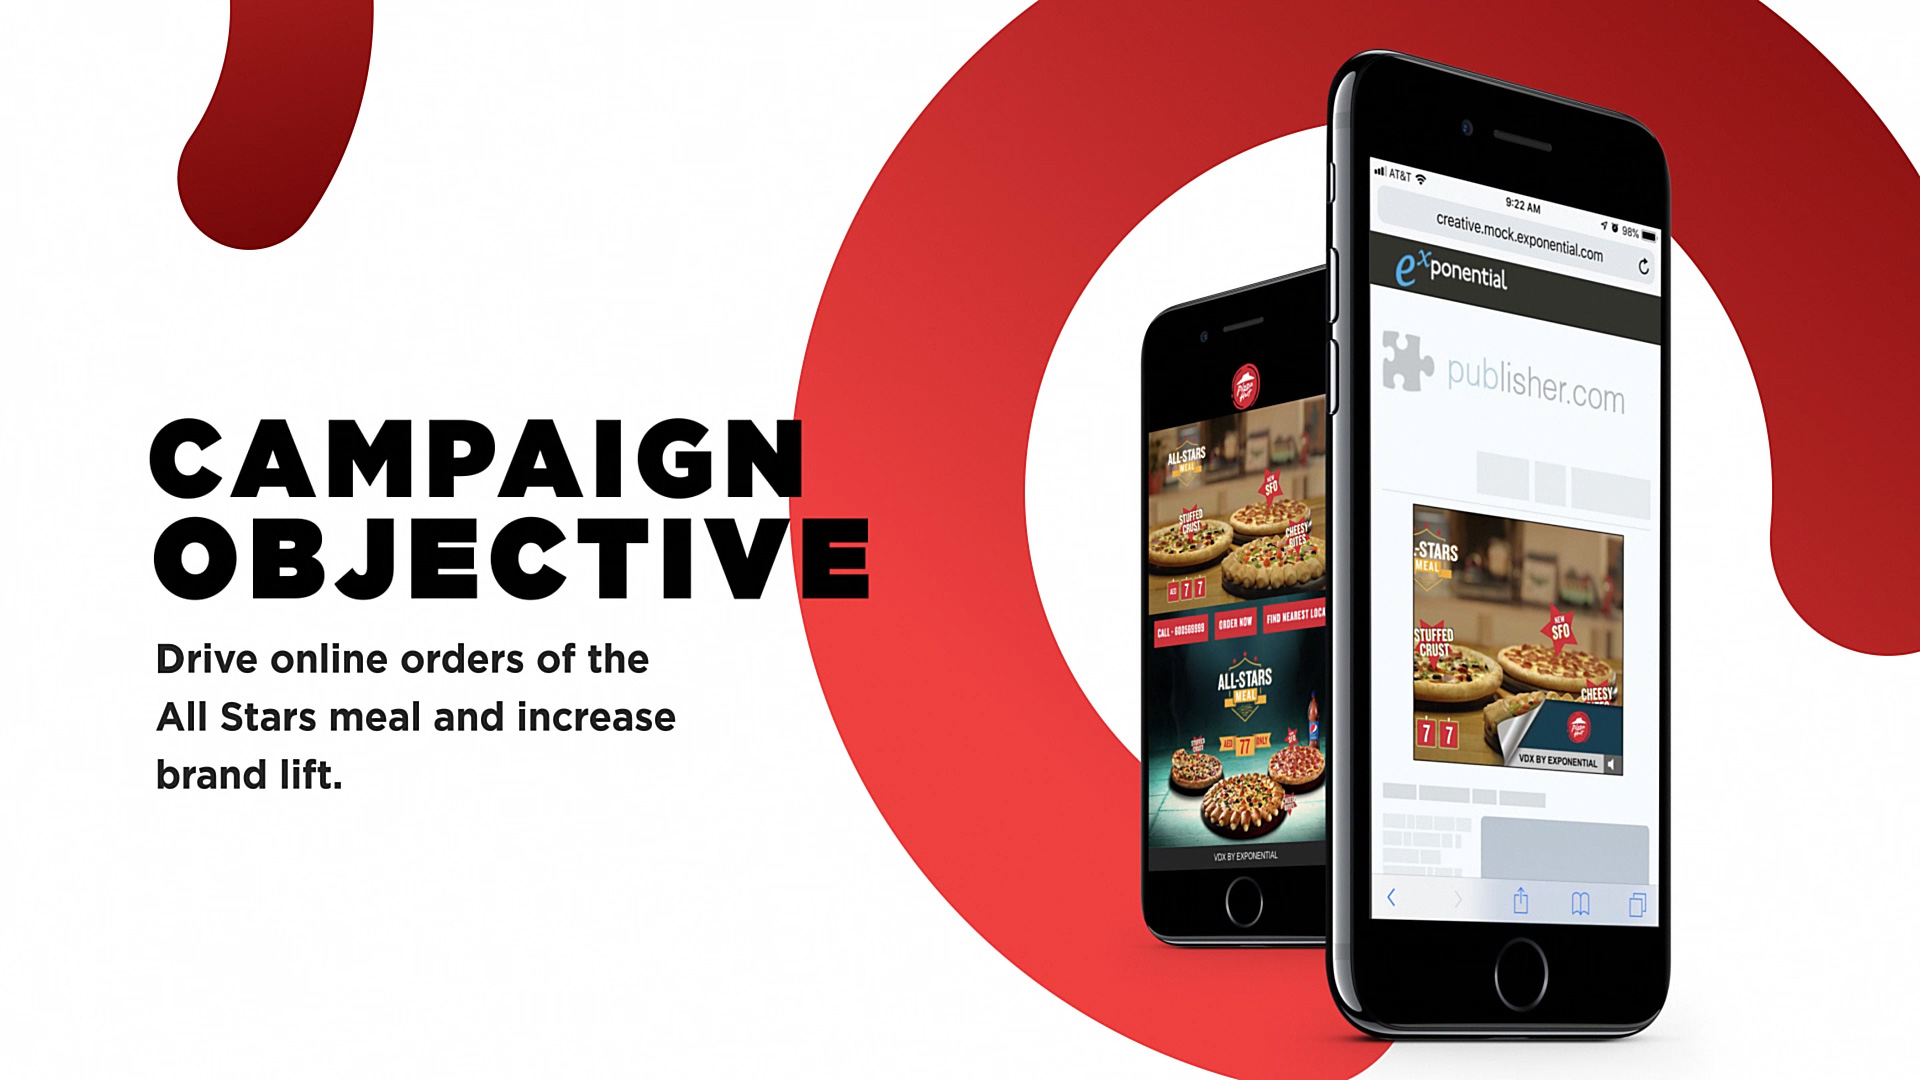 an image of phones with ad mock-ups on an abstract circle background with text that says "Campaign Objective: Drive online orders of the All Stars meal and increase brand lift."